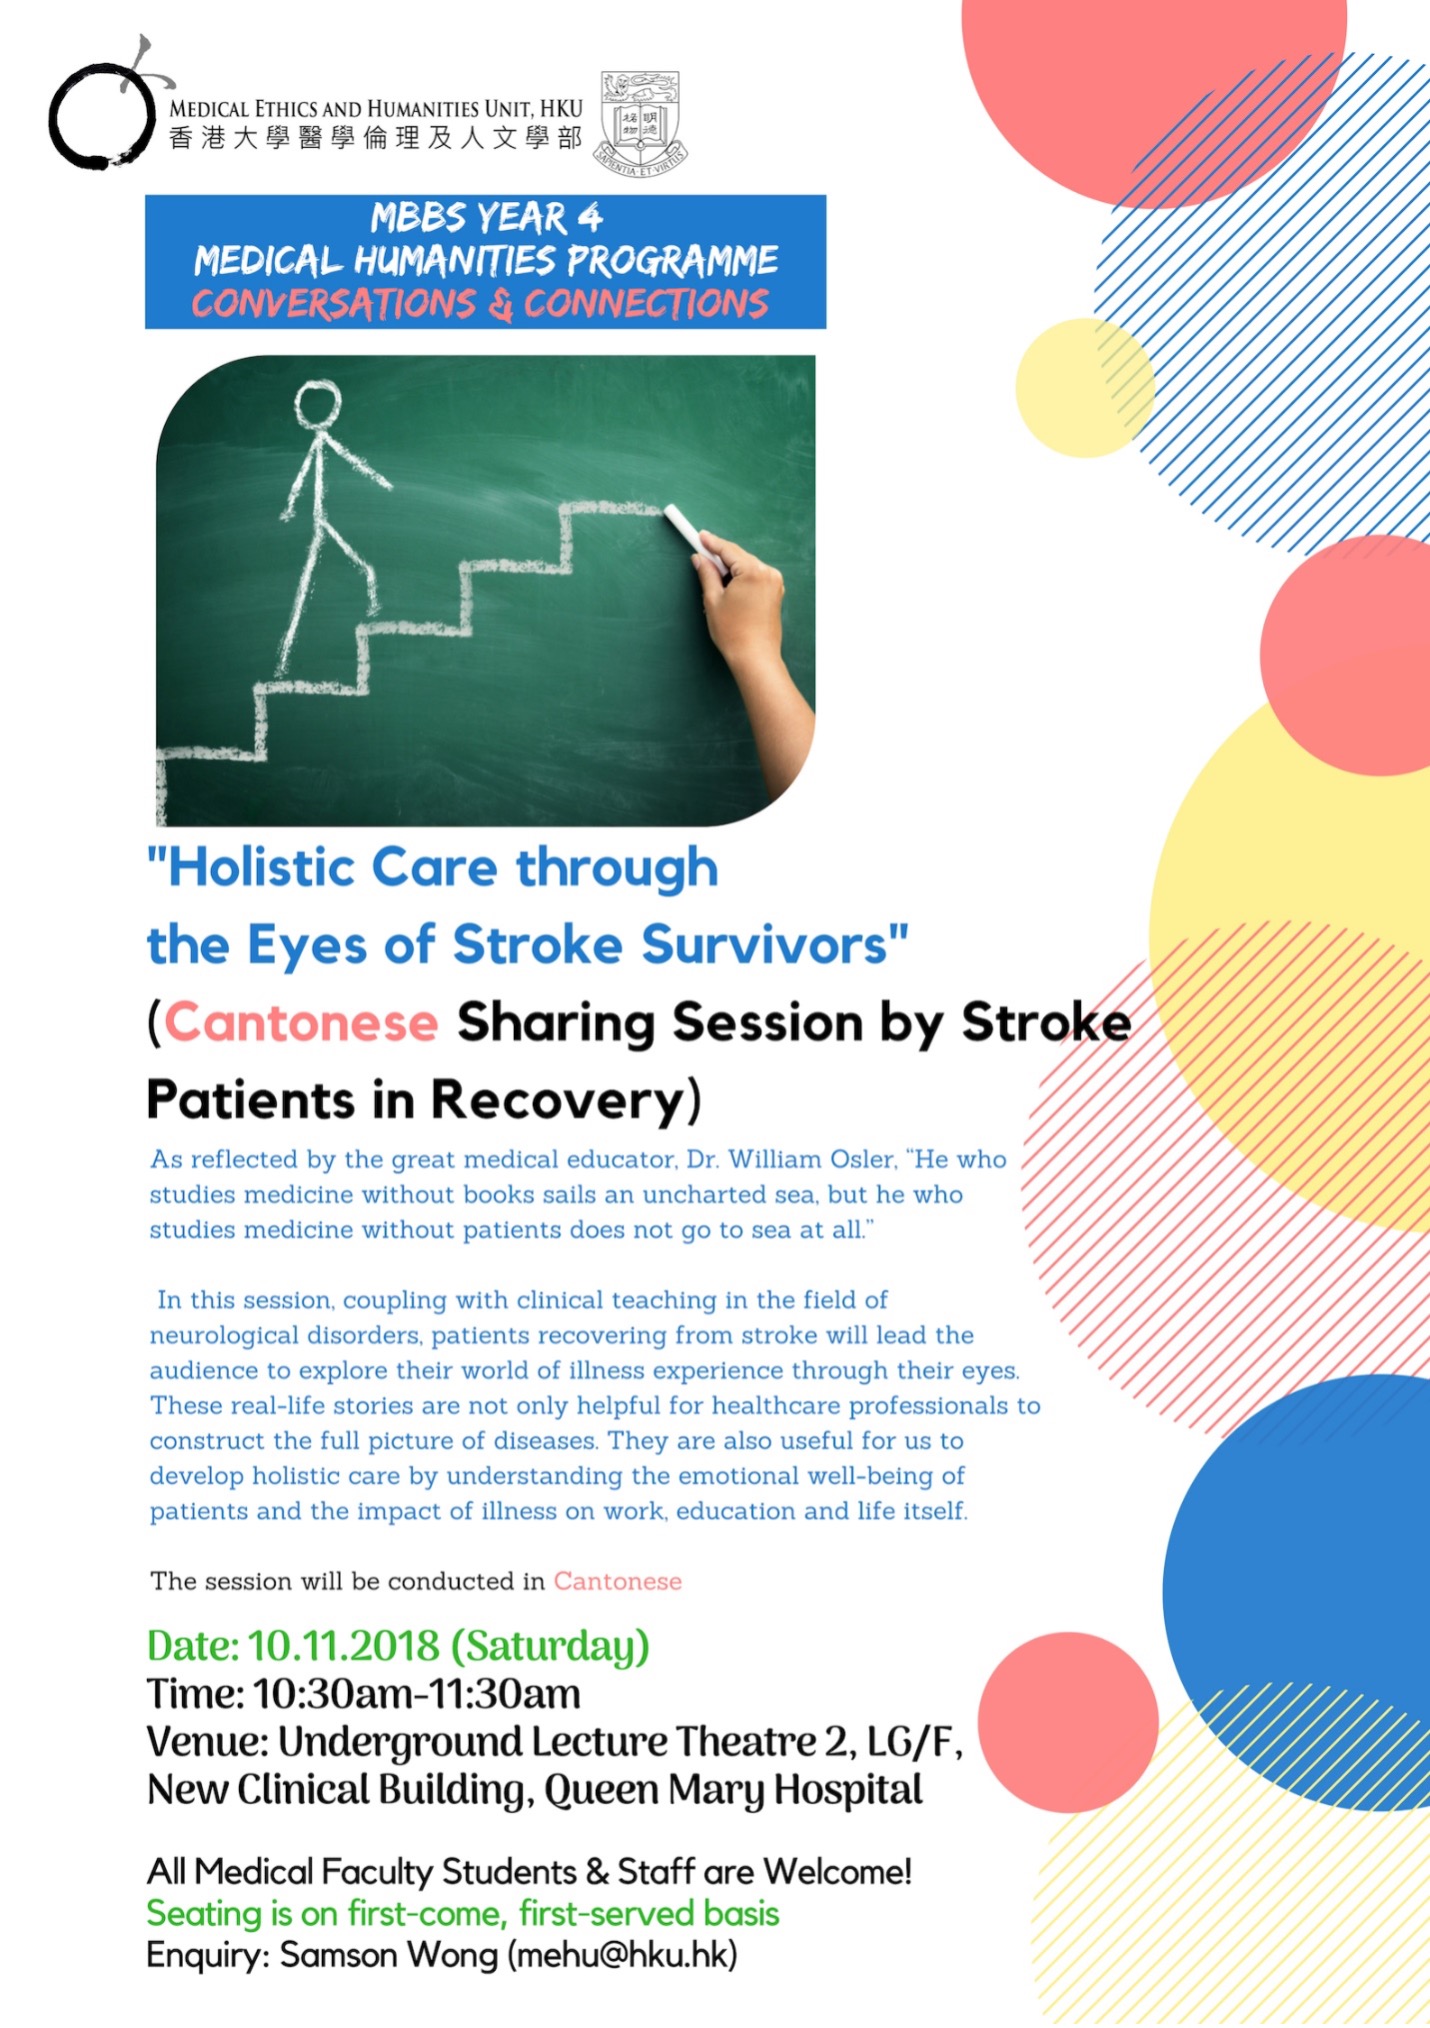 “Holistic Care through the Eyes of Stroke Survivors” (Cantonese Sharing Session by Stroke Patients in Recovery)